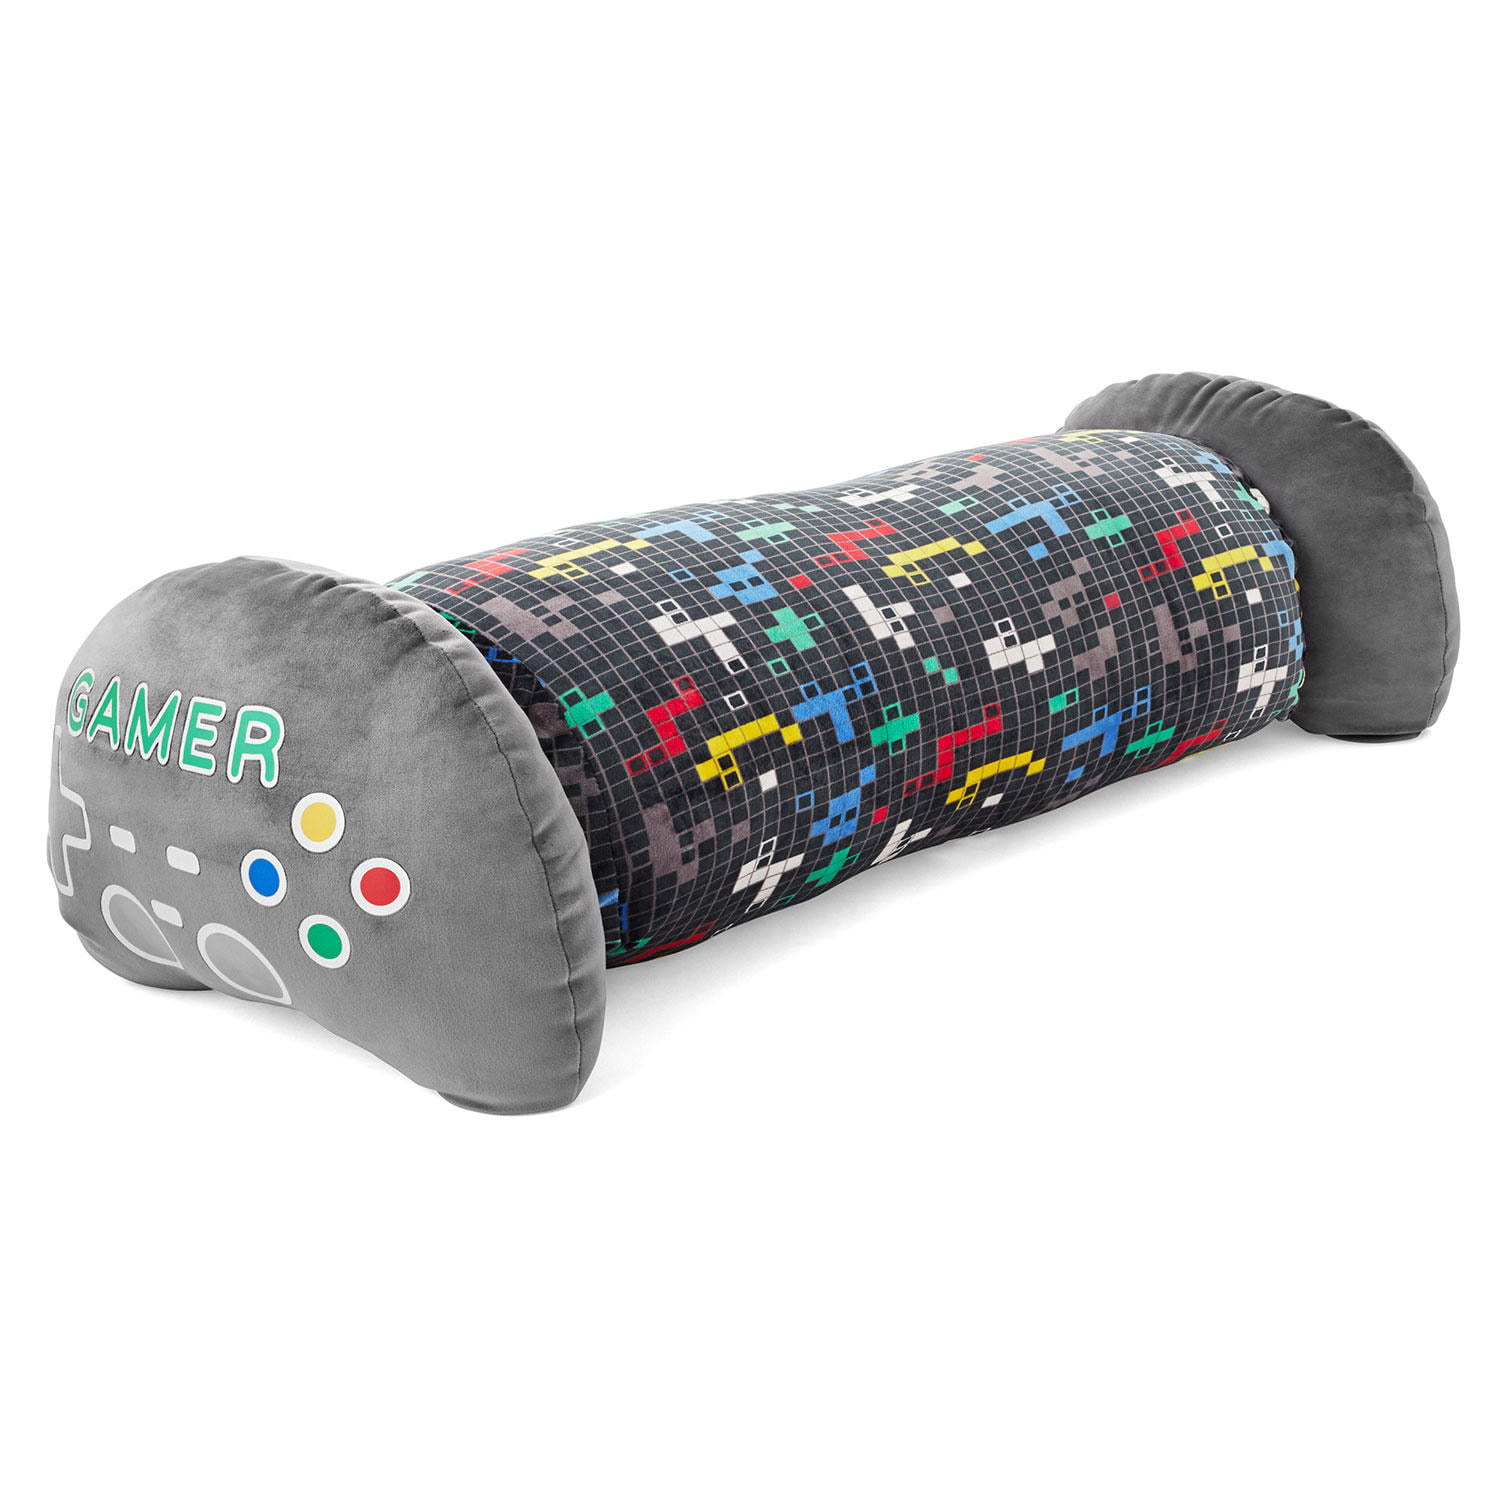 Gaming Champion Squishy Pillow 14in